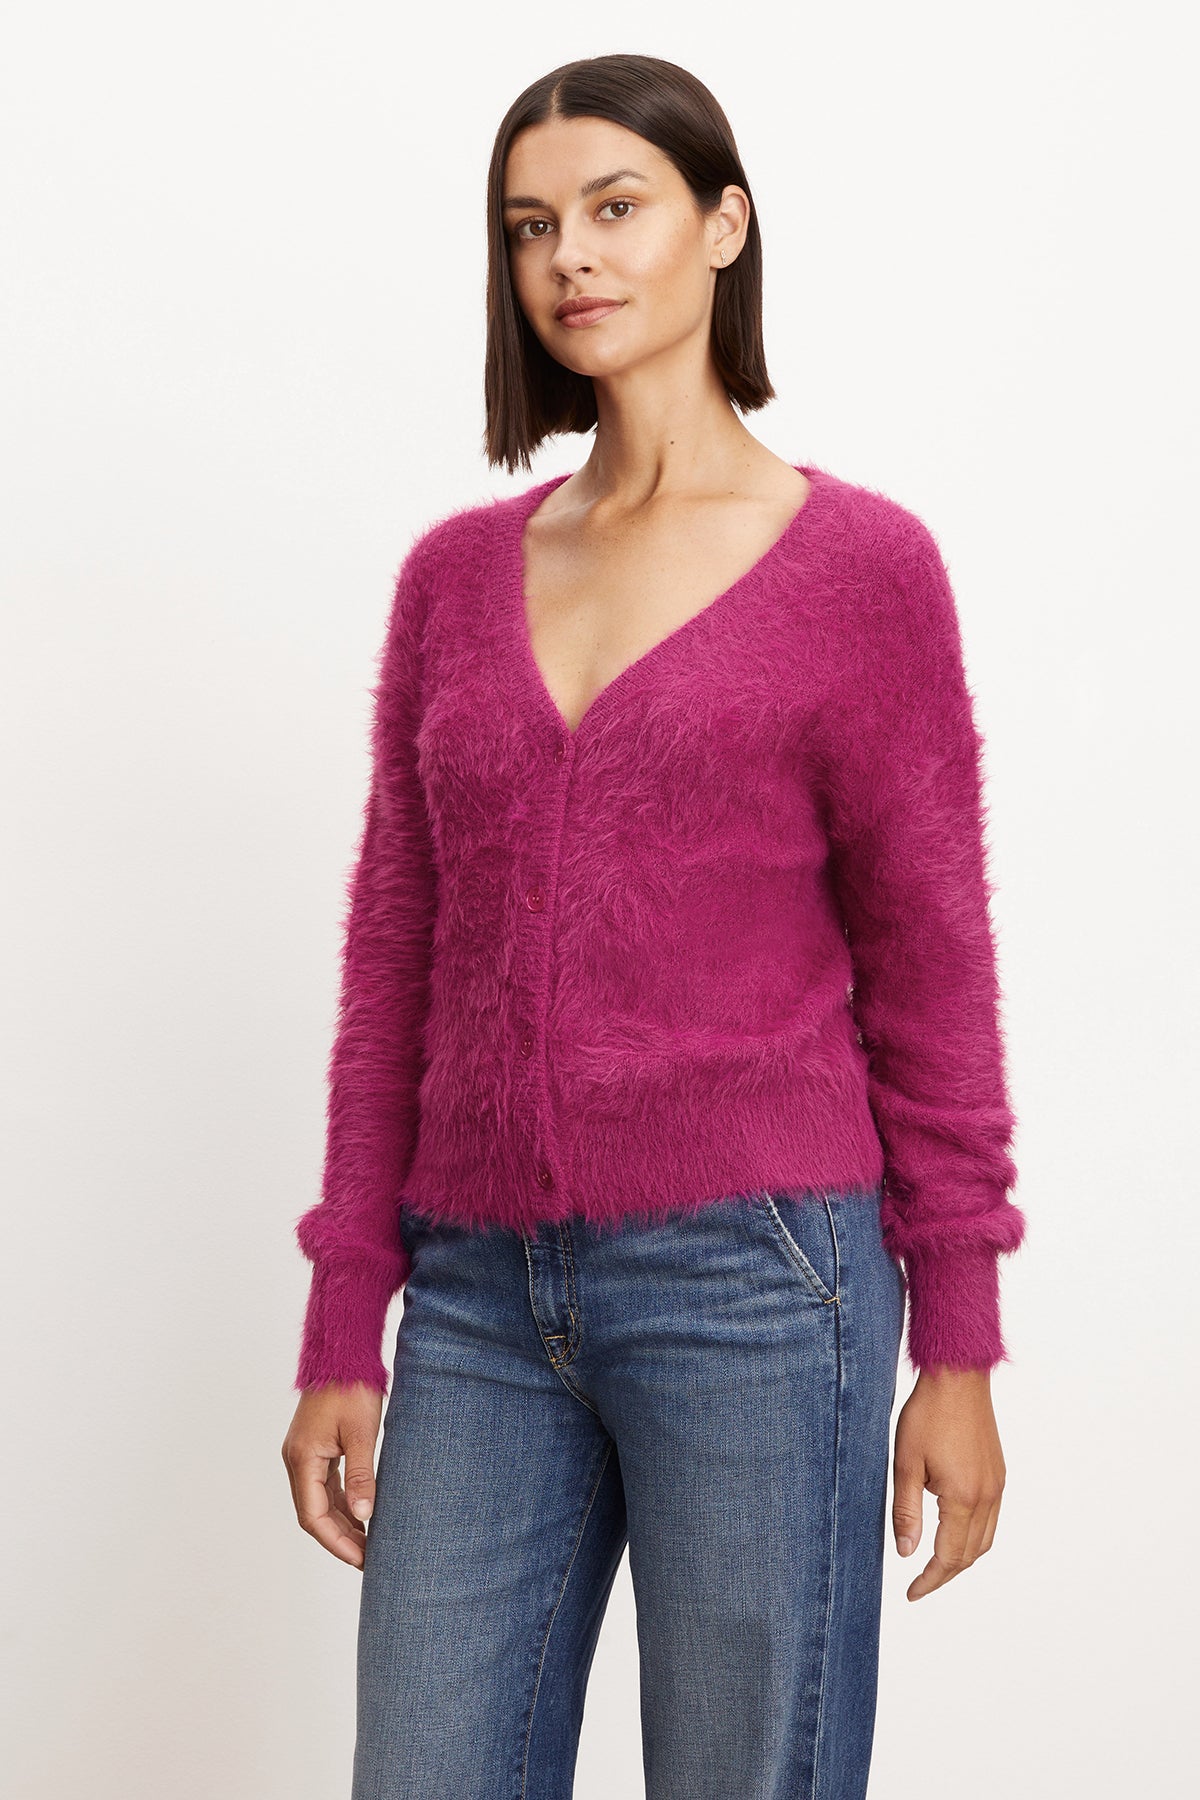 The model is wearing a pink KELSEY FEATHER YARN CARDIGAN made by Velvet by Graham & Spencer.-35571997933761